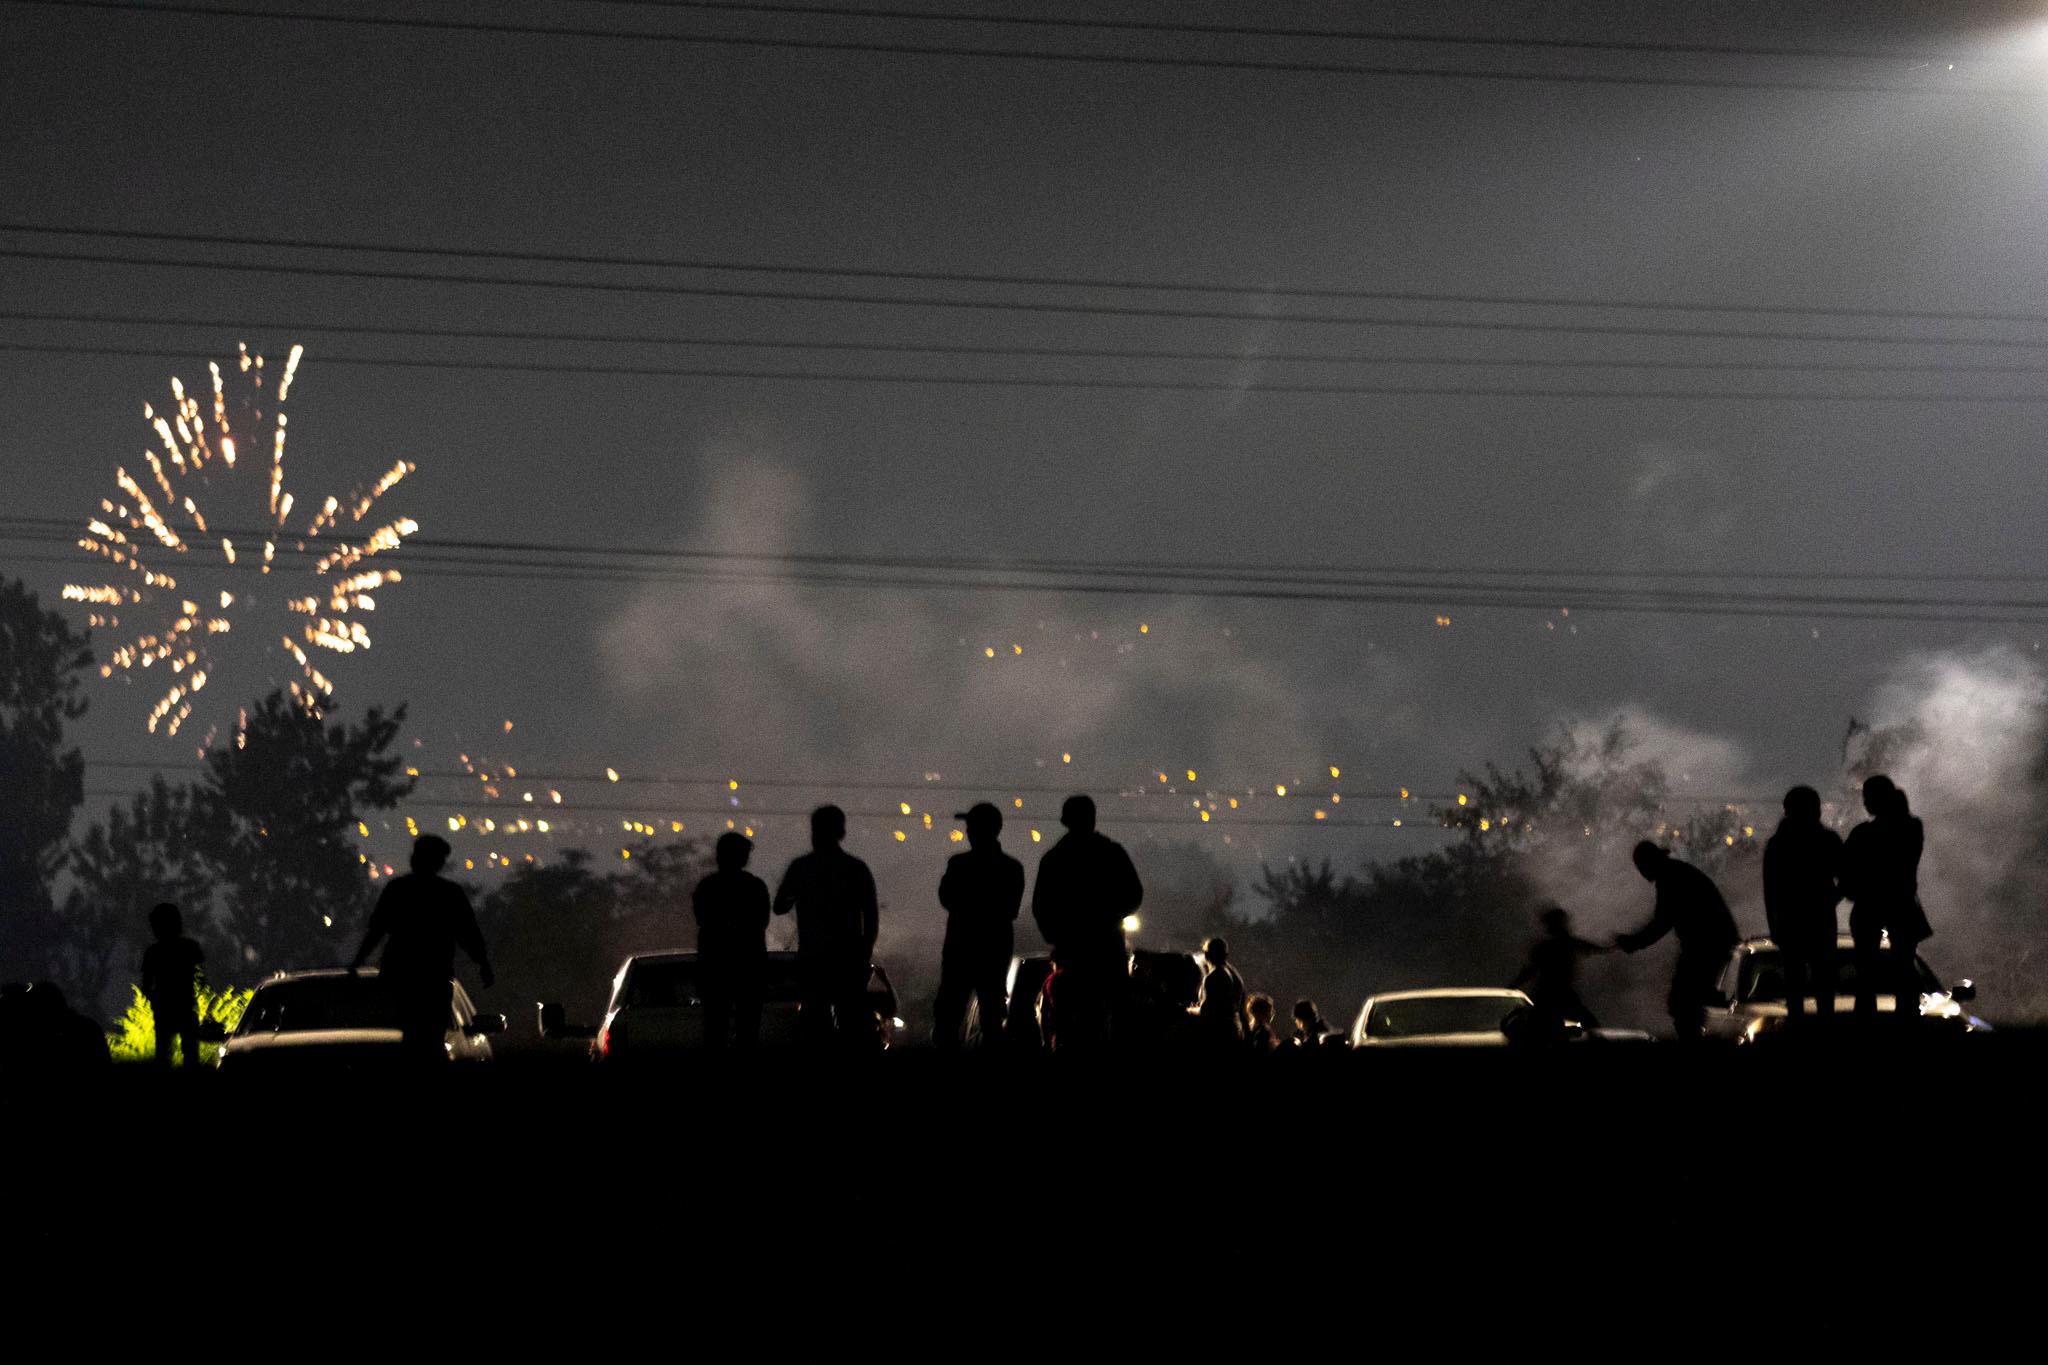 People are silhouetted as fireworks blow up in the background. The air around them is very hazy.